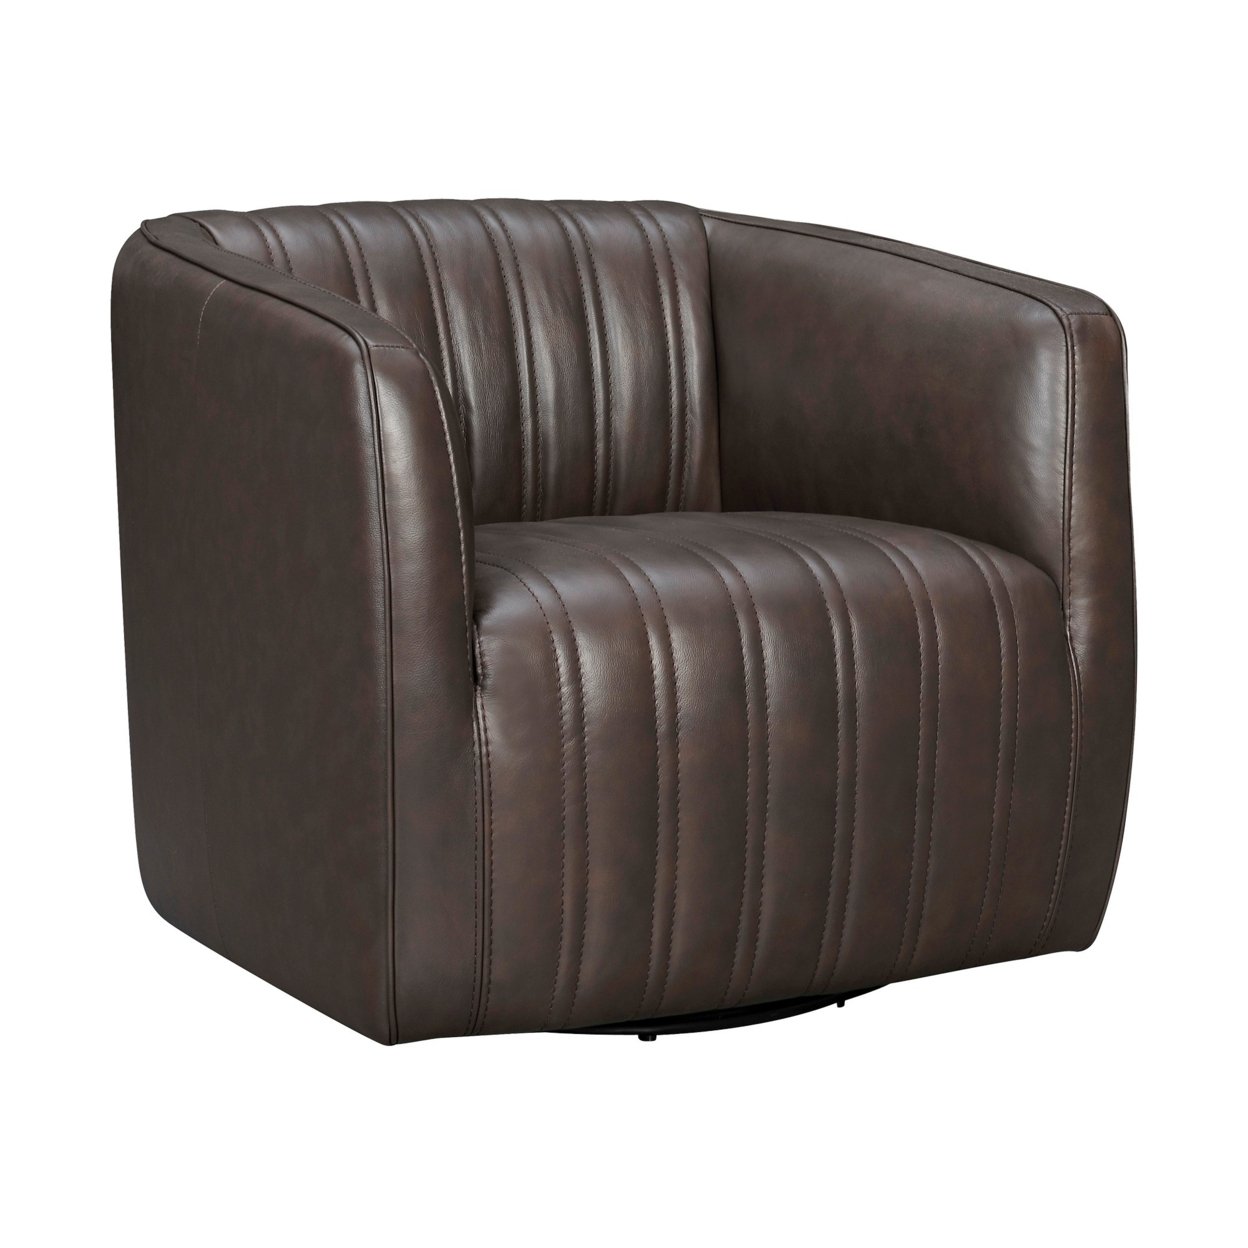 Leather Swivel Barrel Chair With Stitched Details, Brown- Saltoro Sherpi